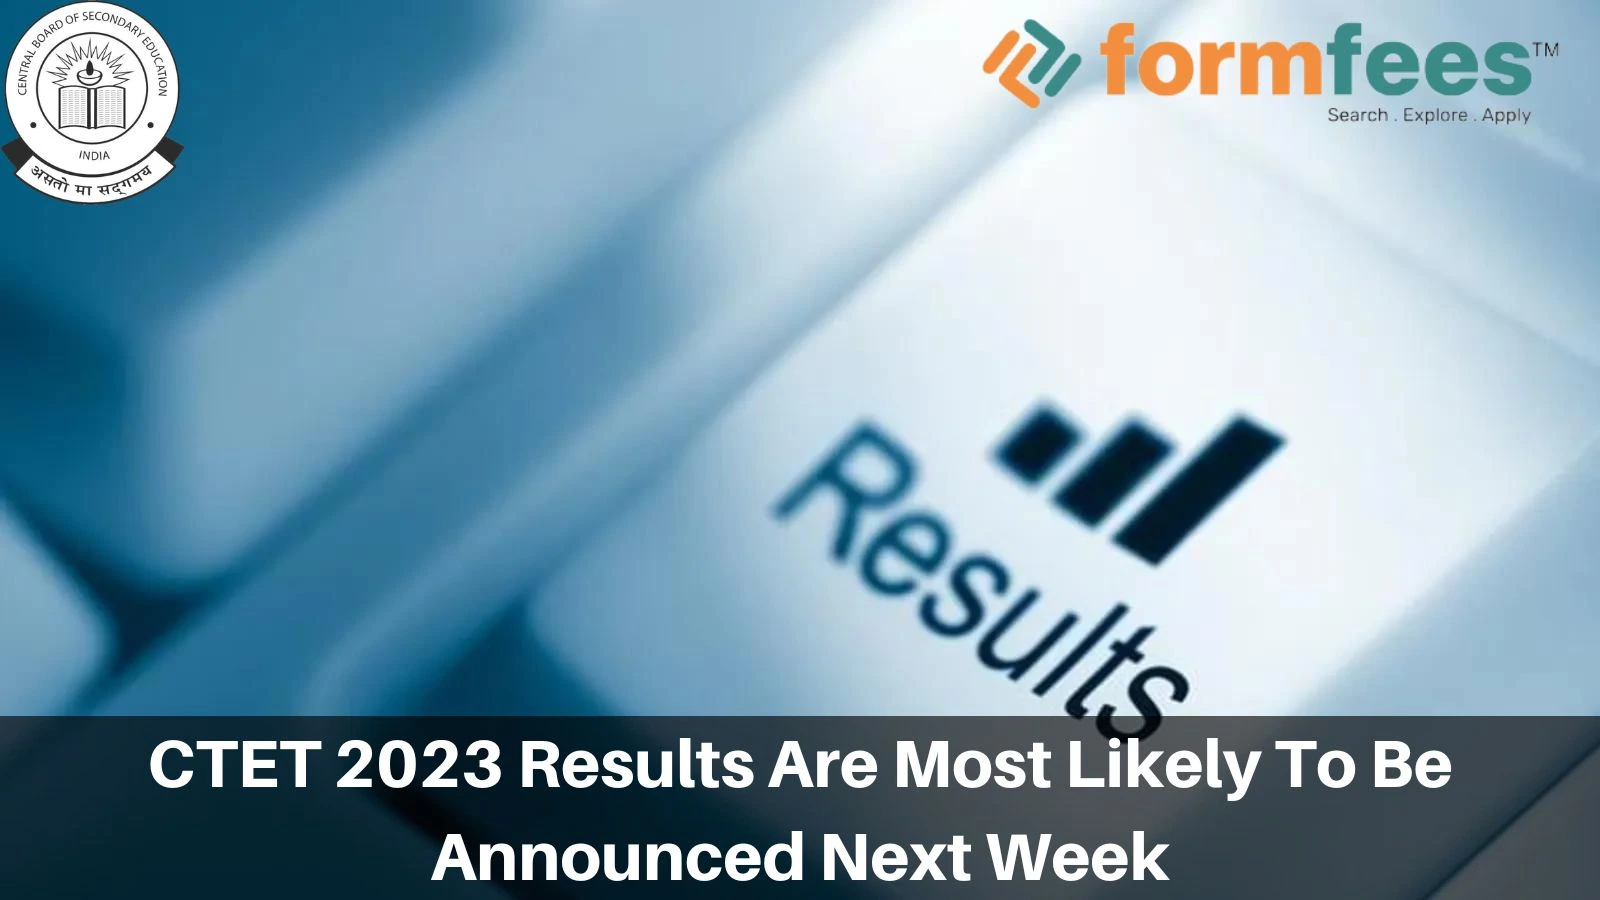 CTET 2023 Results Are Most Likely To Be Announced Next Week